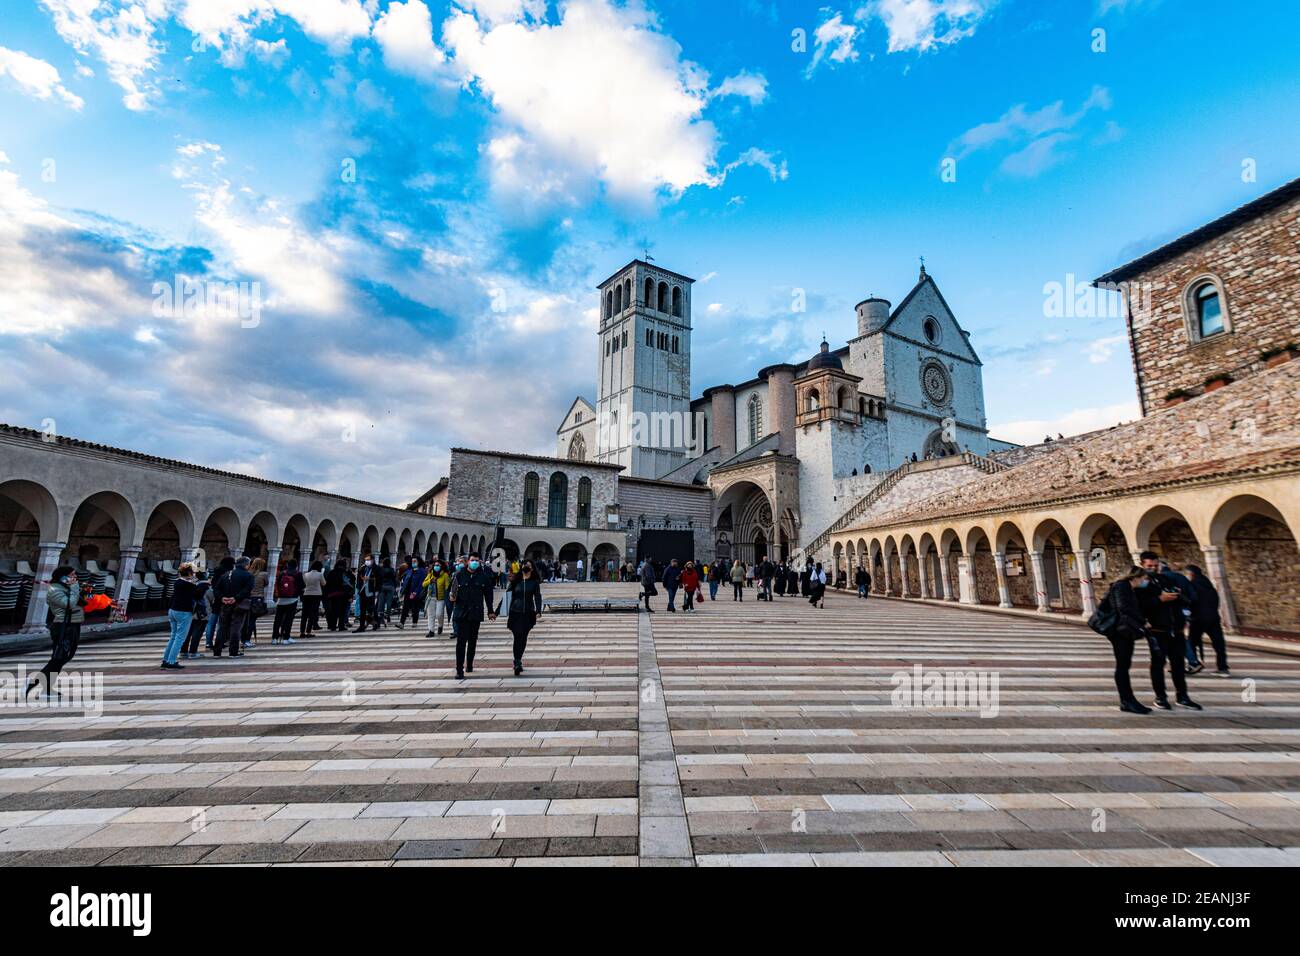 Square in front of the Basilica of Saint Francis of Assisi, UNESCO World Heritage Site, Assisi, Umbria, Italy, Europe Stock Photo